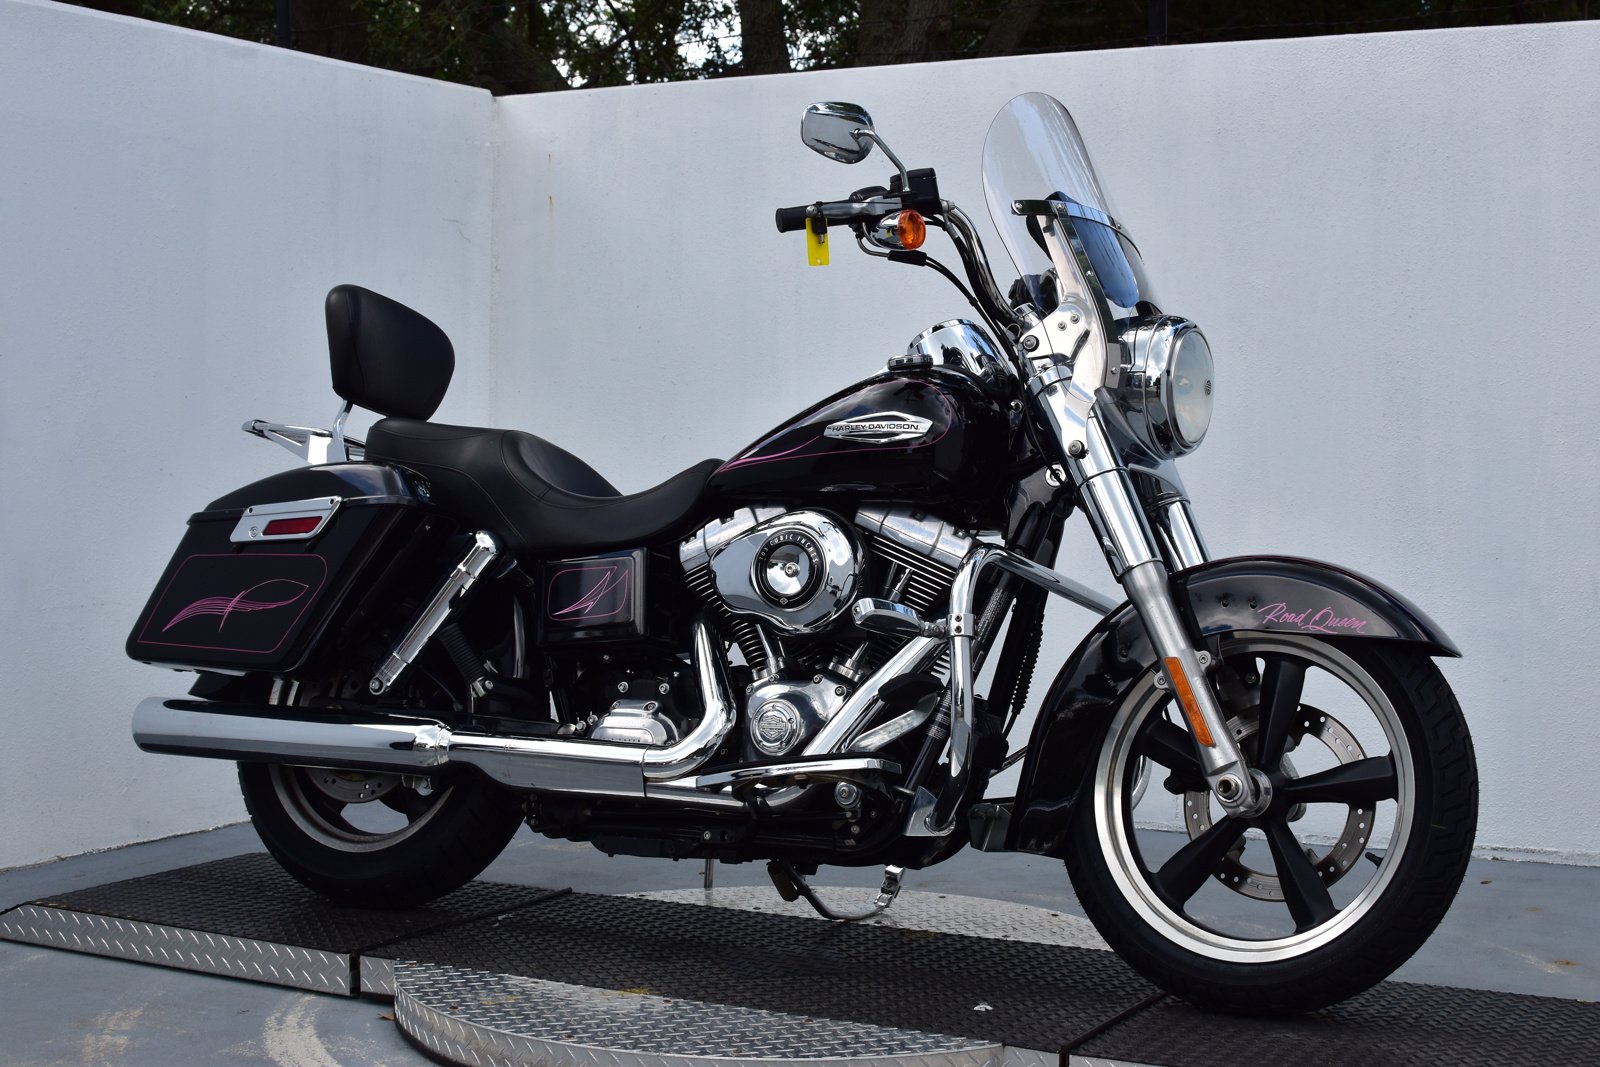 Pre-Owned 2012 Harley-Davidson Dyna Switchback FLD Dyna in Fort Myers # ...